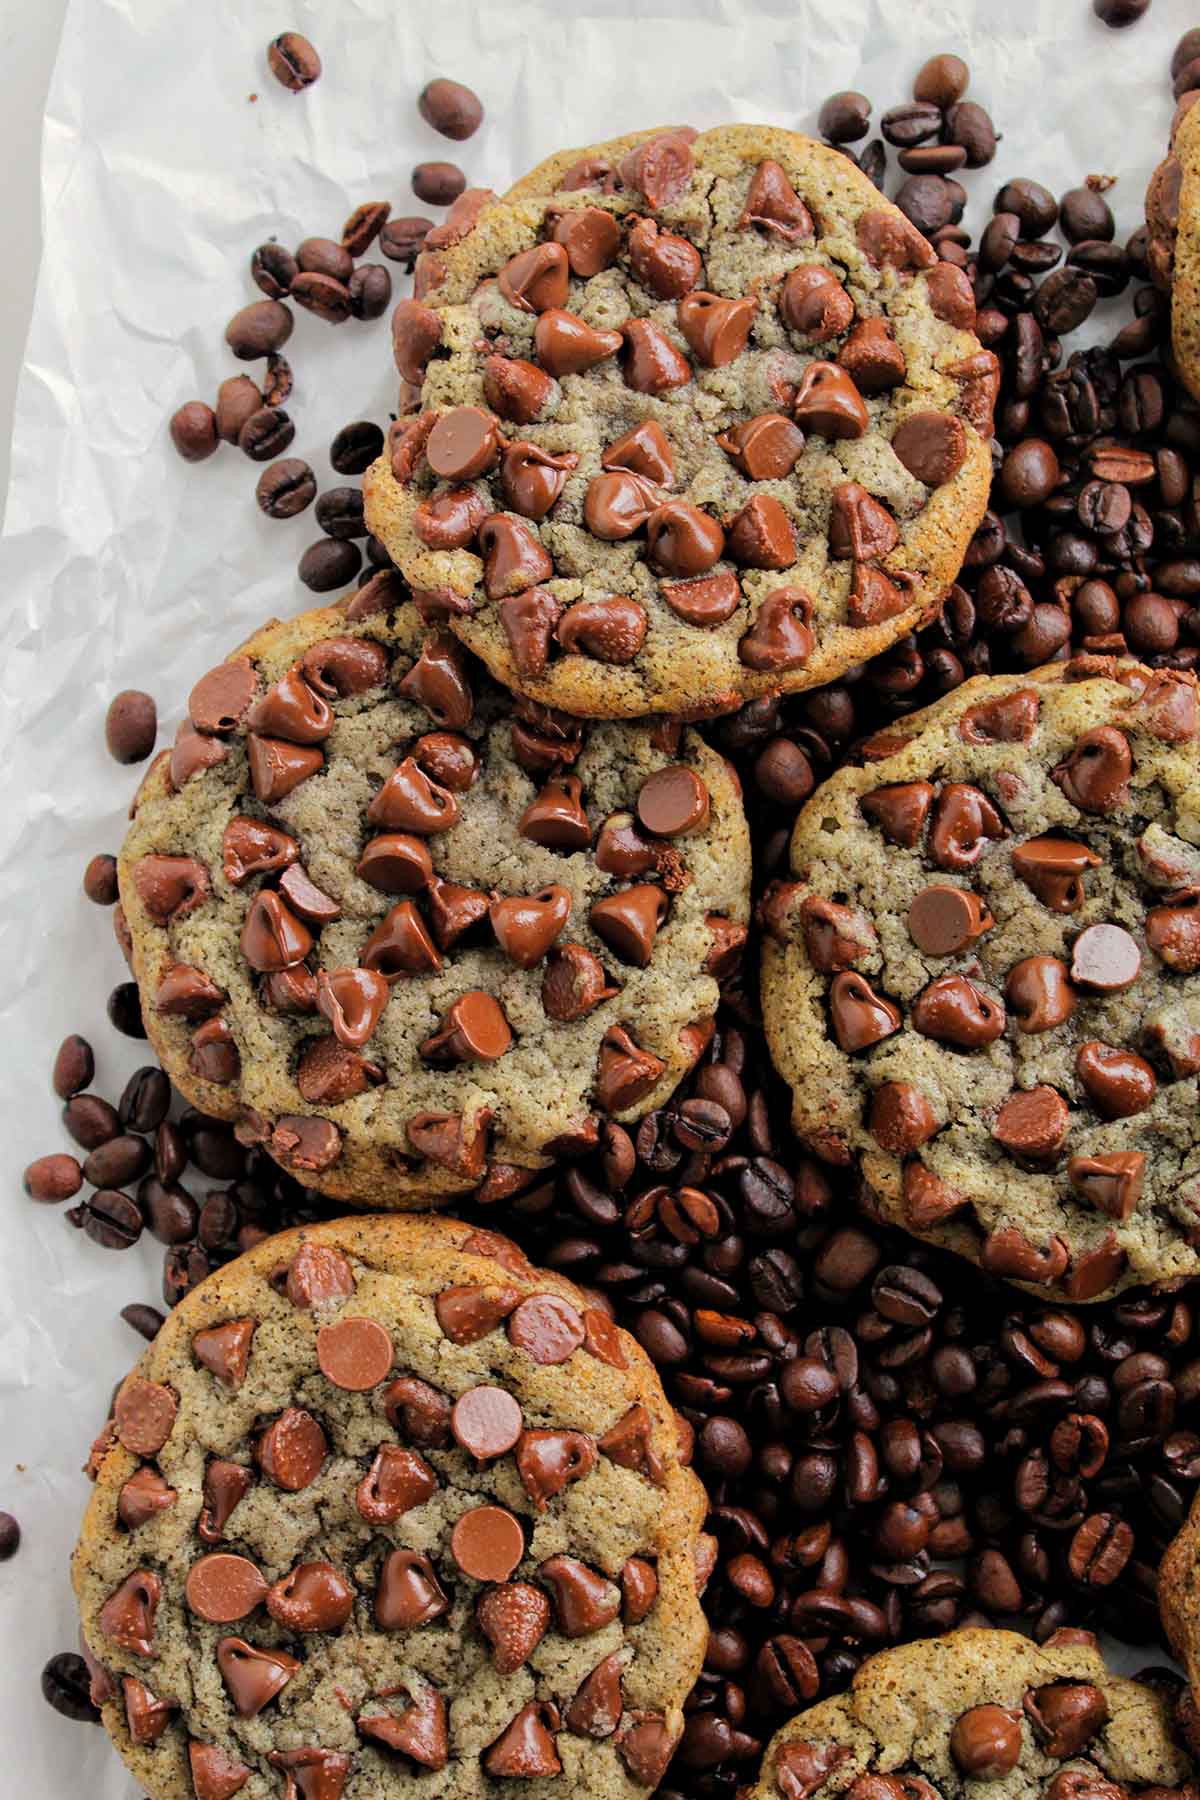 multiple chocolate chip cookies laying on coffee beans.